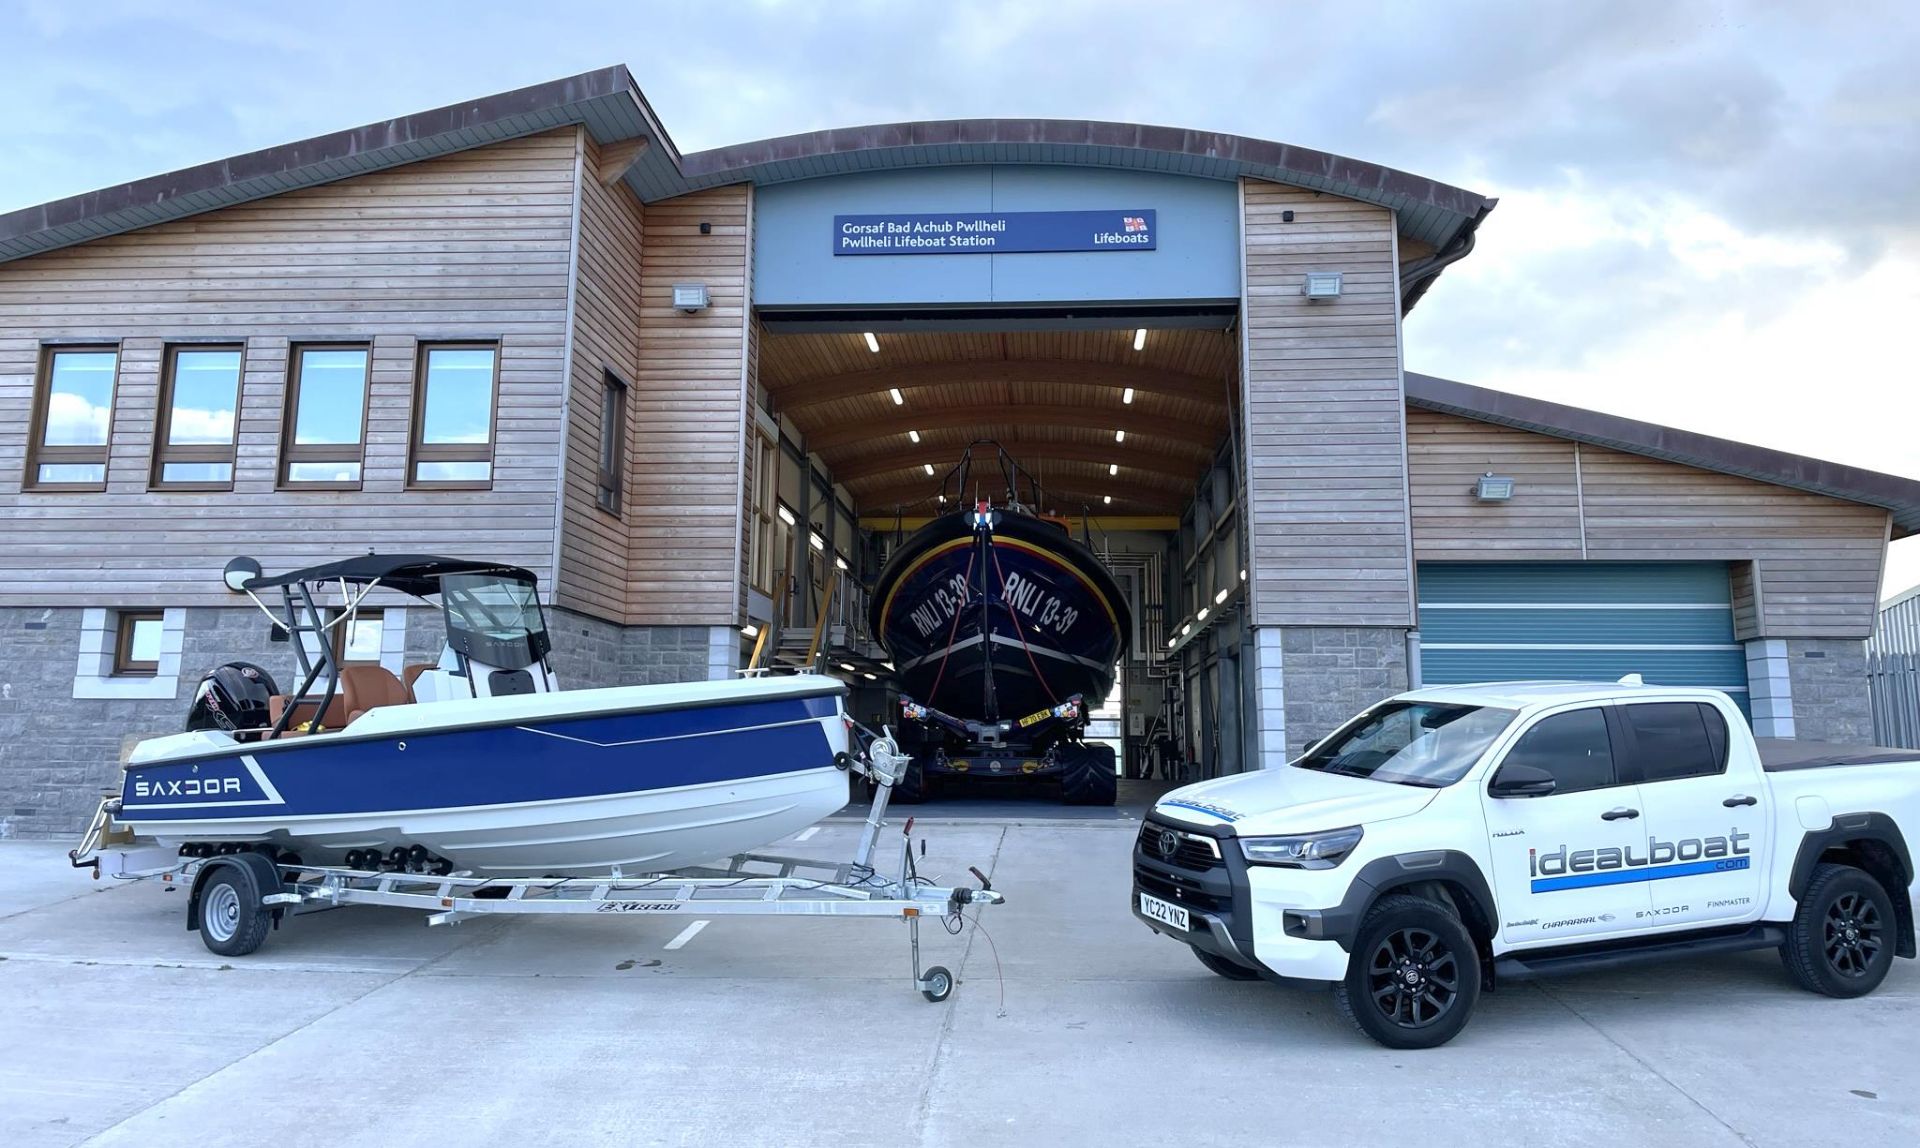 Fantastic opportunity to own a highly desirable watercraft AND support the RNLI Charity